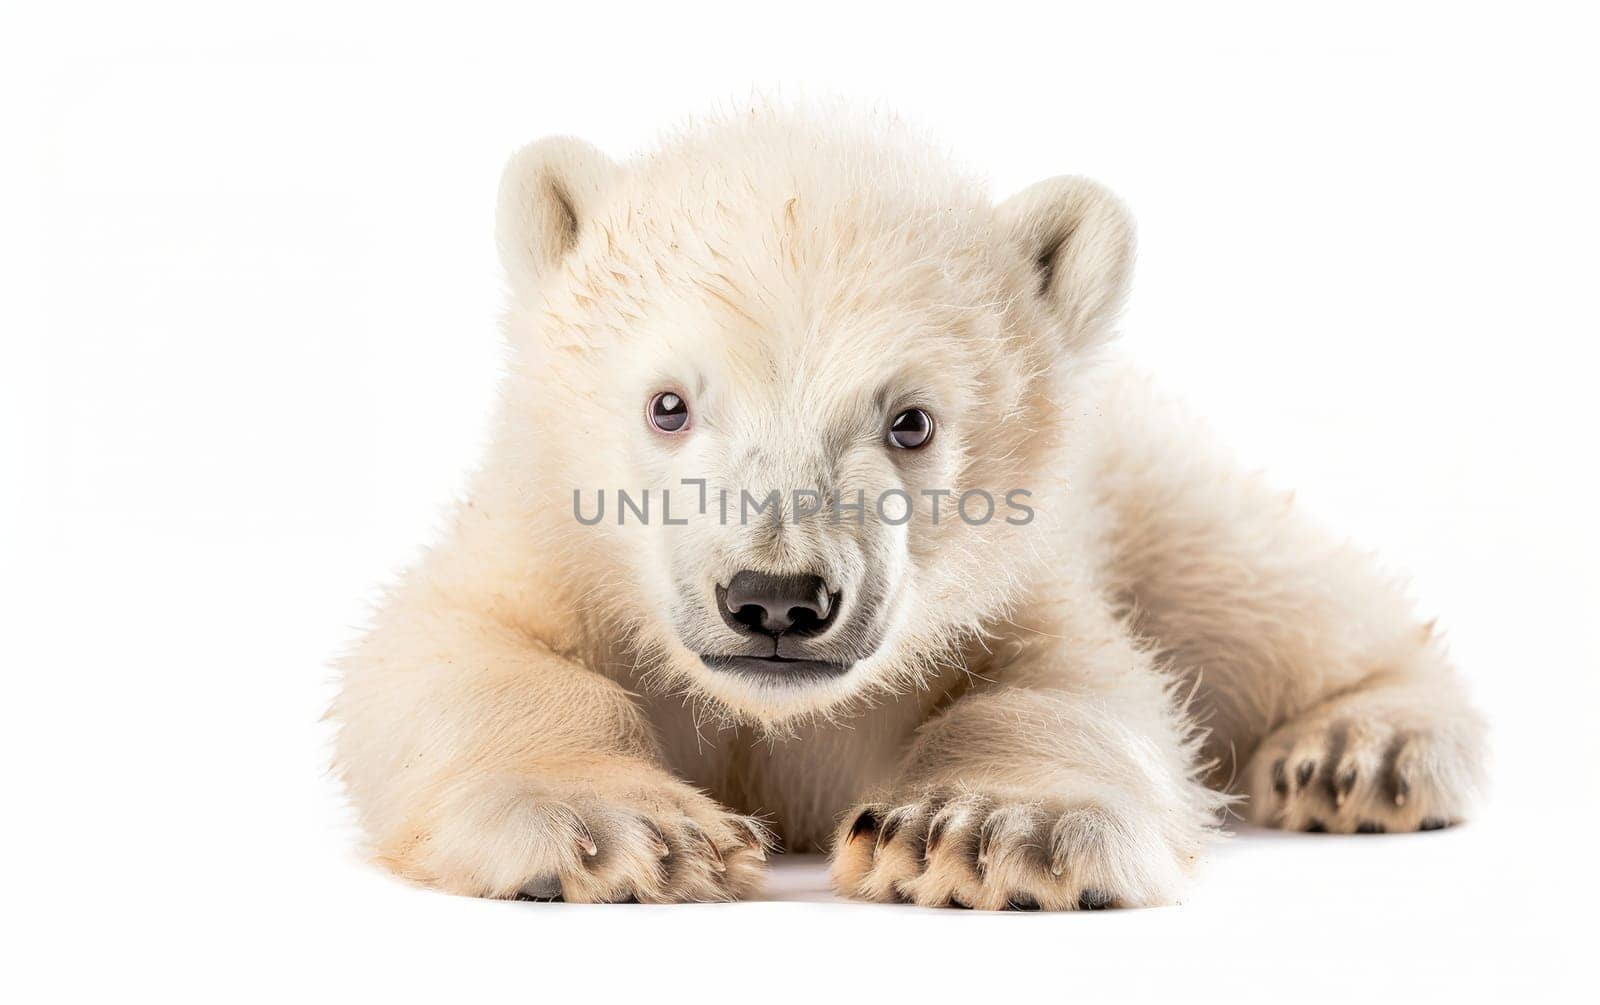 A polar bear cub lies comfortably against a white background, its innocence and vulnerability on full display. The cub's soft fur and relaxed posture create an image of peacefulness and playfulness